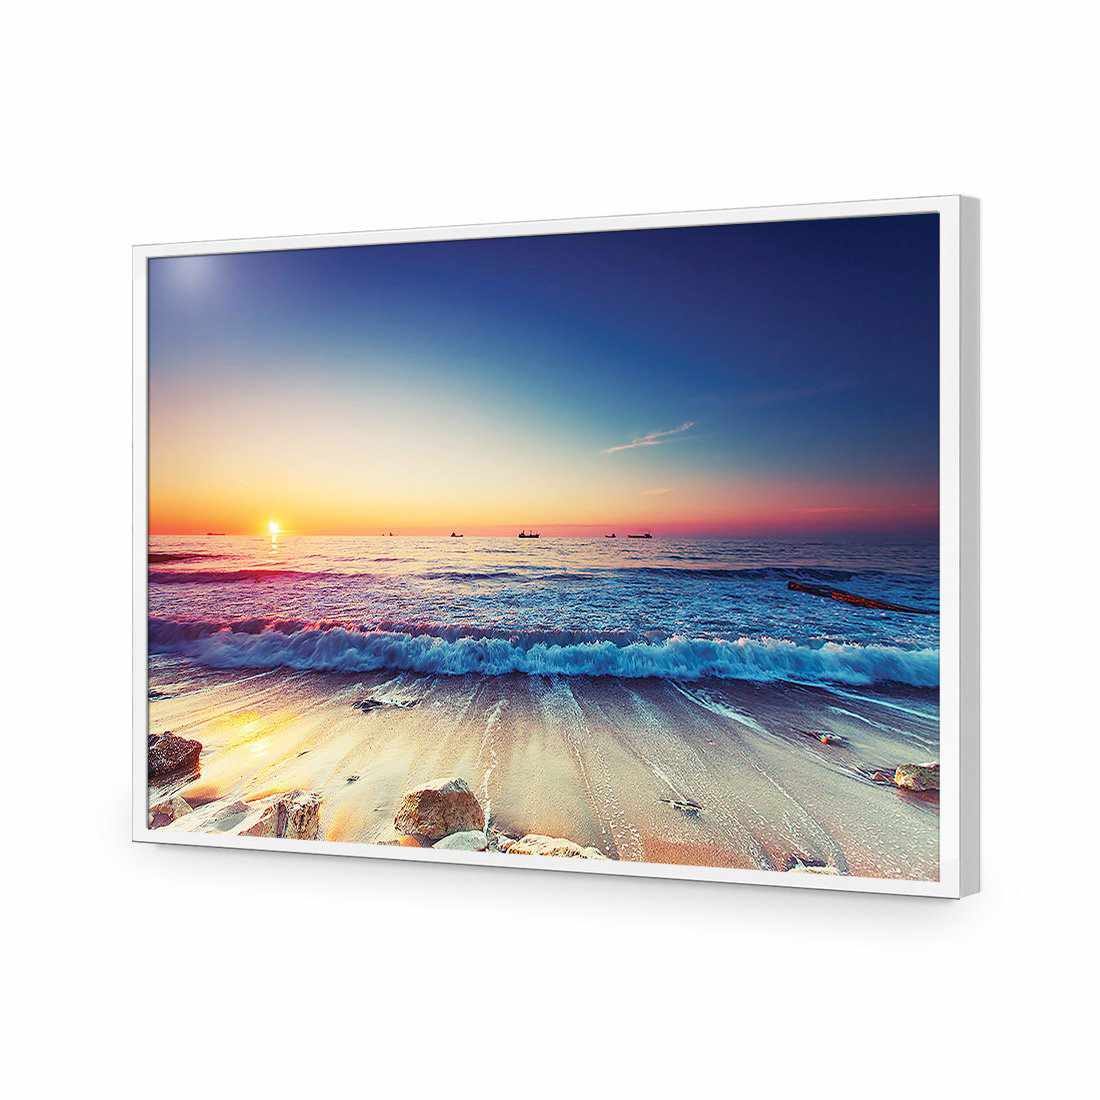 High Tide Sunset-Acrylic-Wall Art Design-Without Border-Acrylic - White Frame-45x30cm-Wall Art Designs